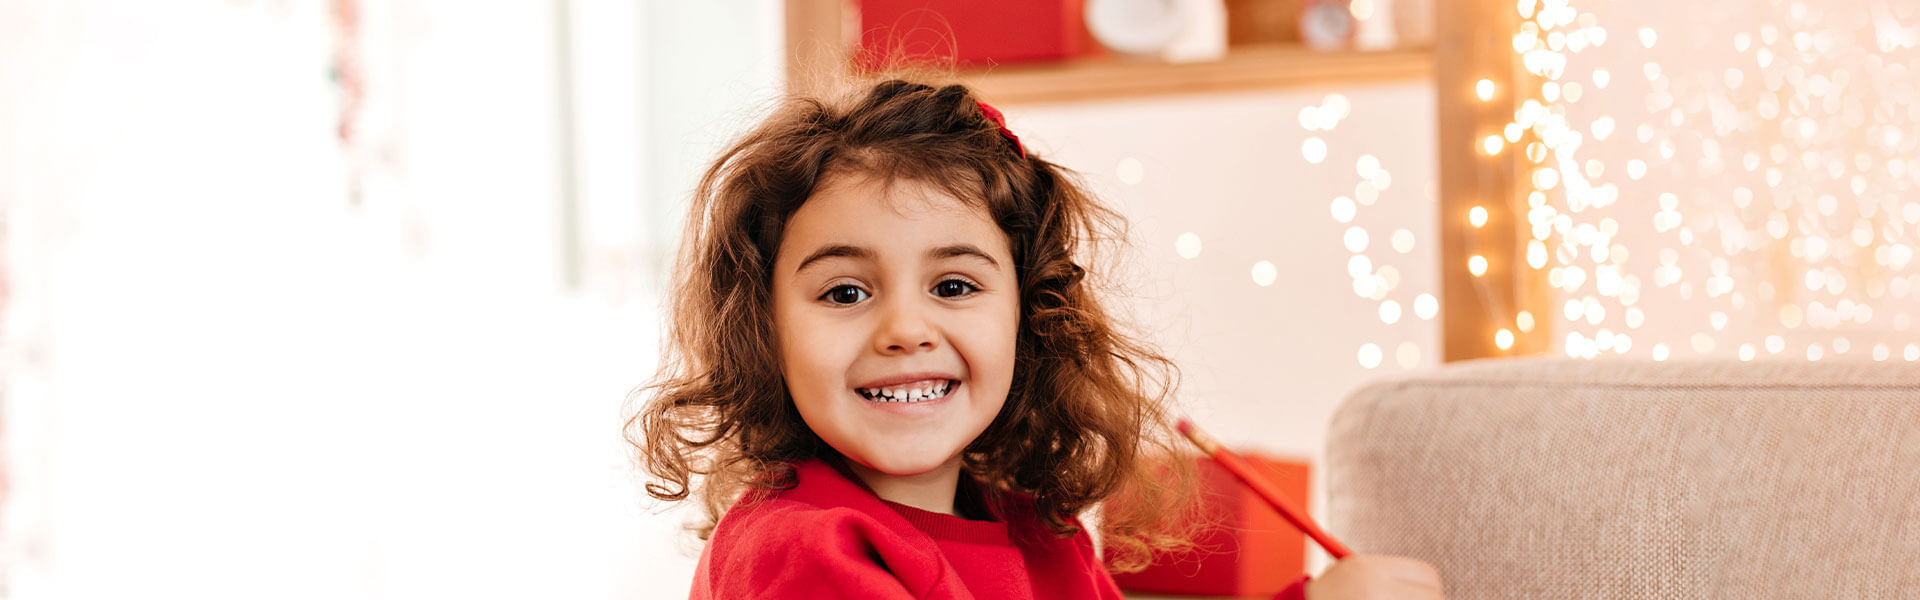 Understanding More About Pediatric Dentistry